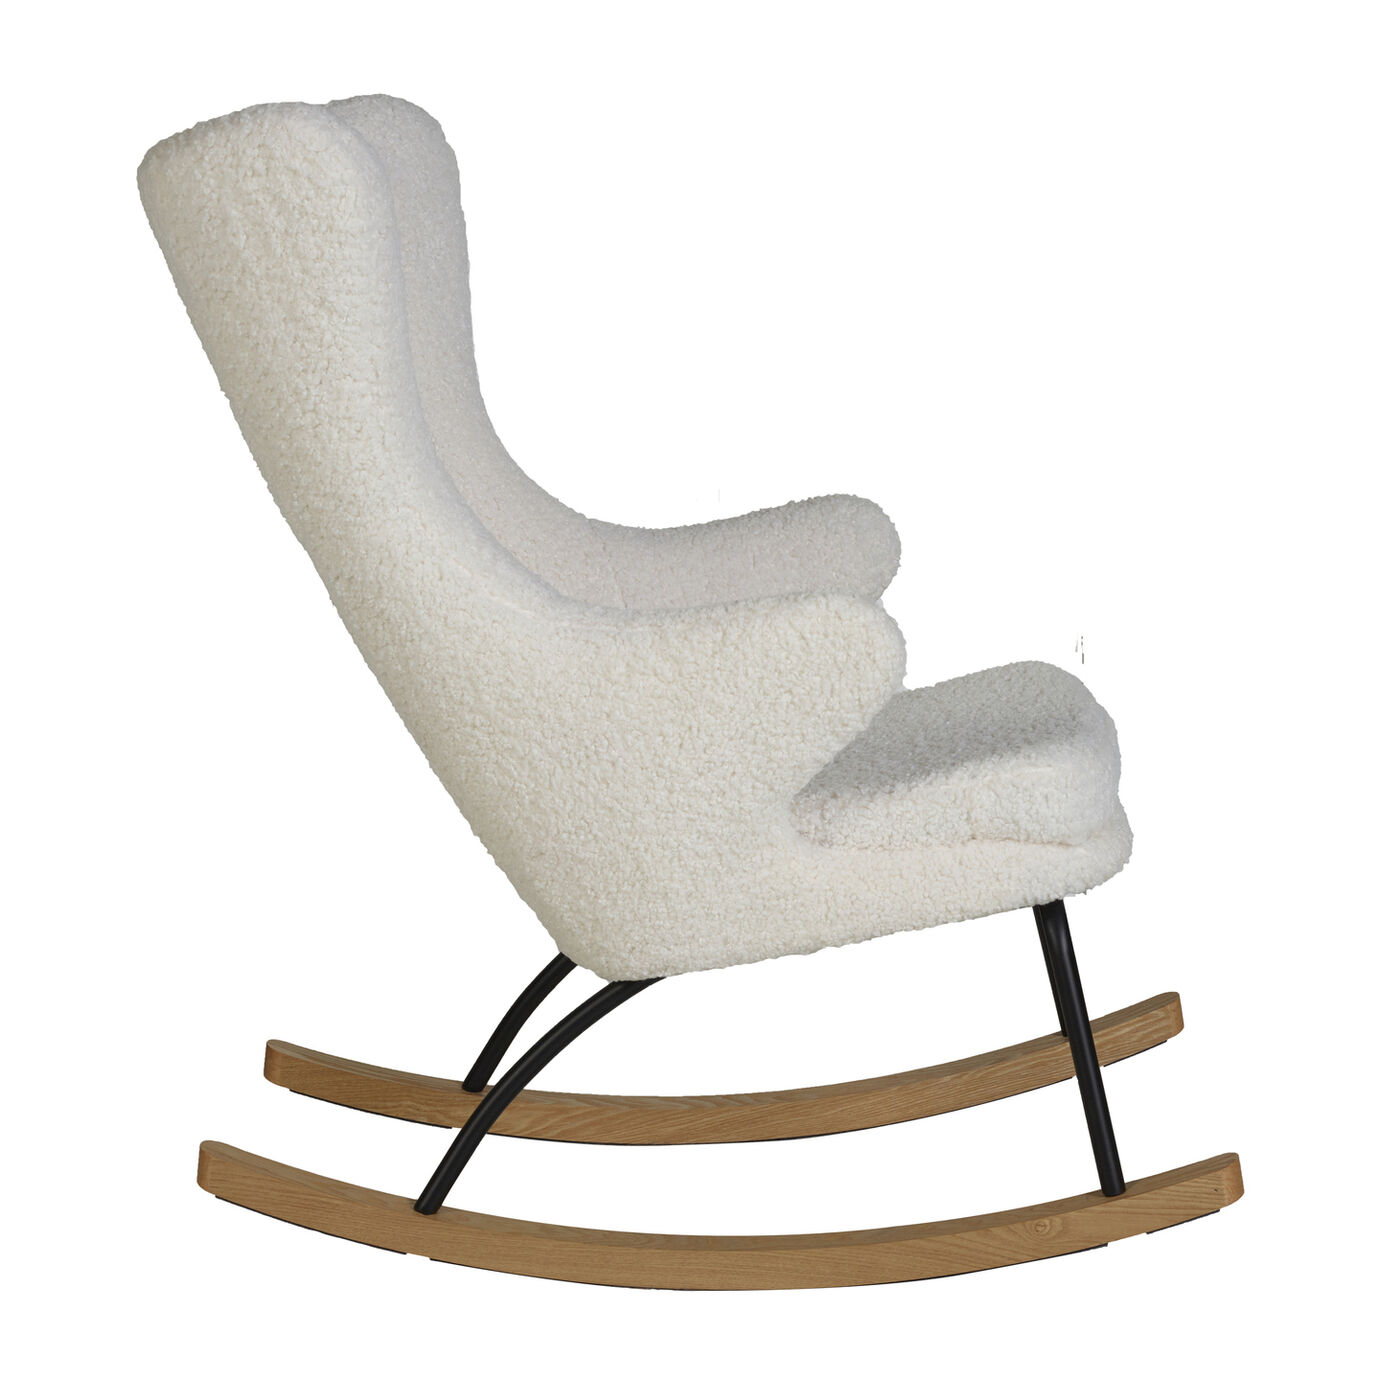 Afbeelding Quax Rocking Adult Chair De Luxe I Limited Edition